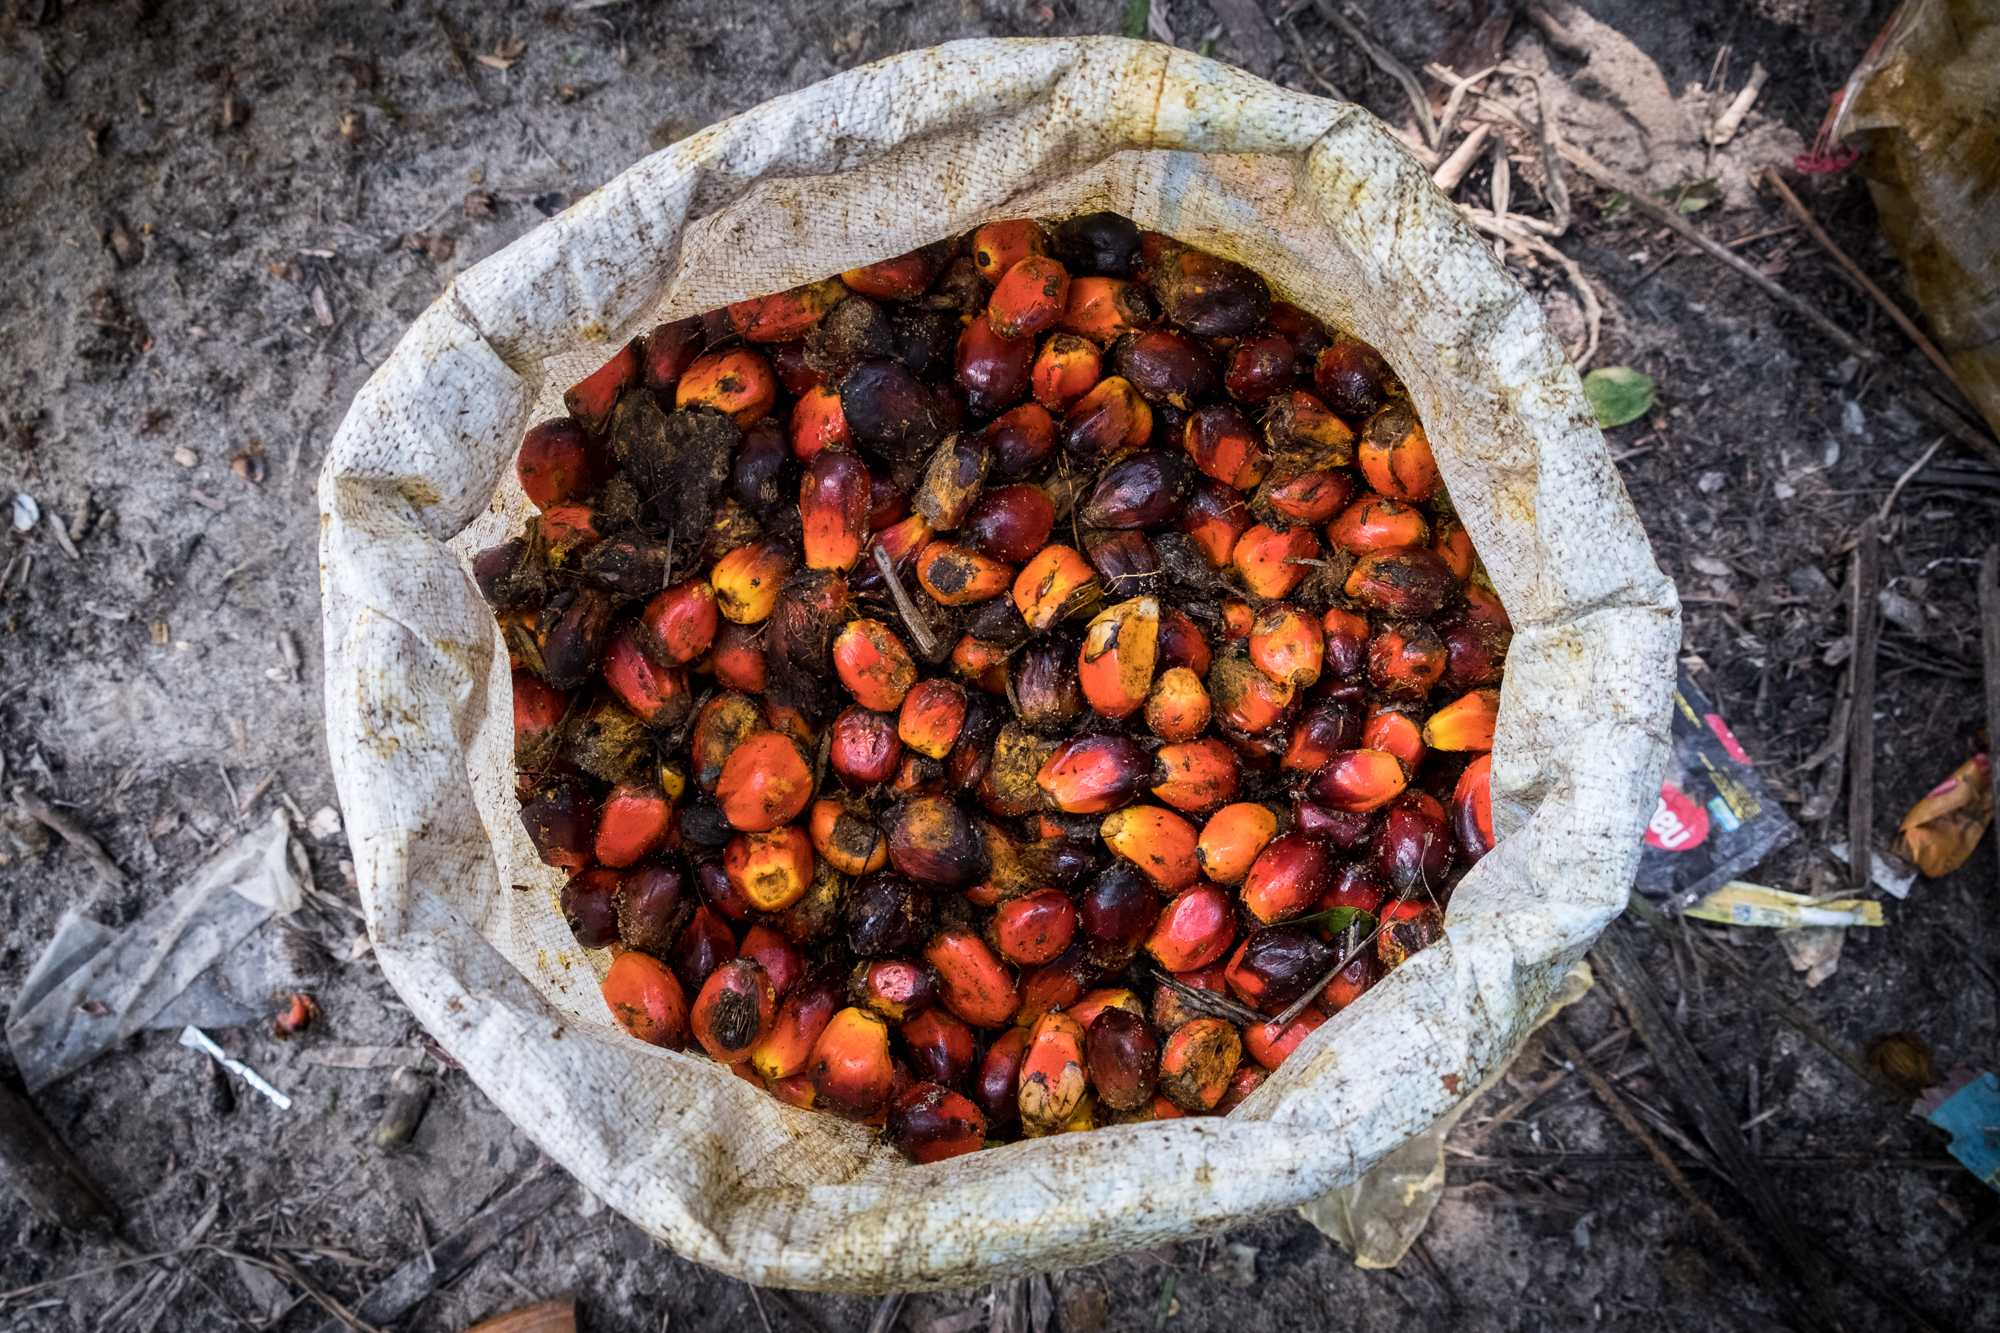 A bag of oil palm fruitlets gathered by the Suku Anak Dalam. 